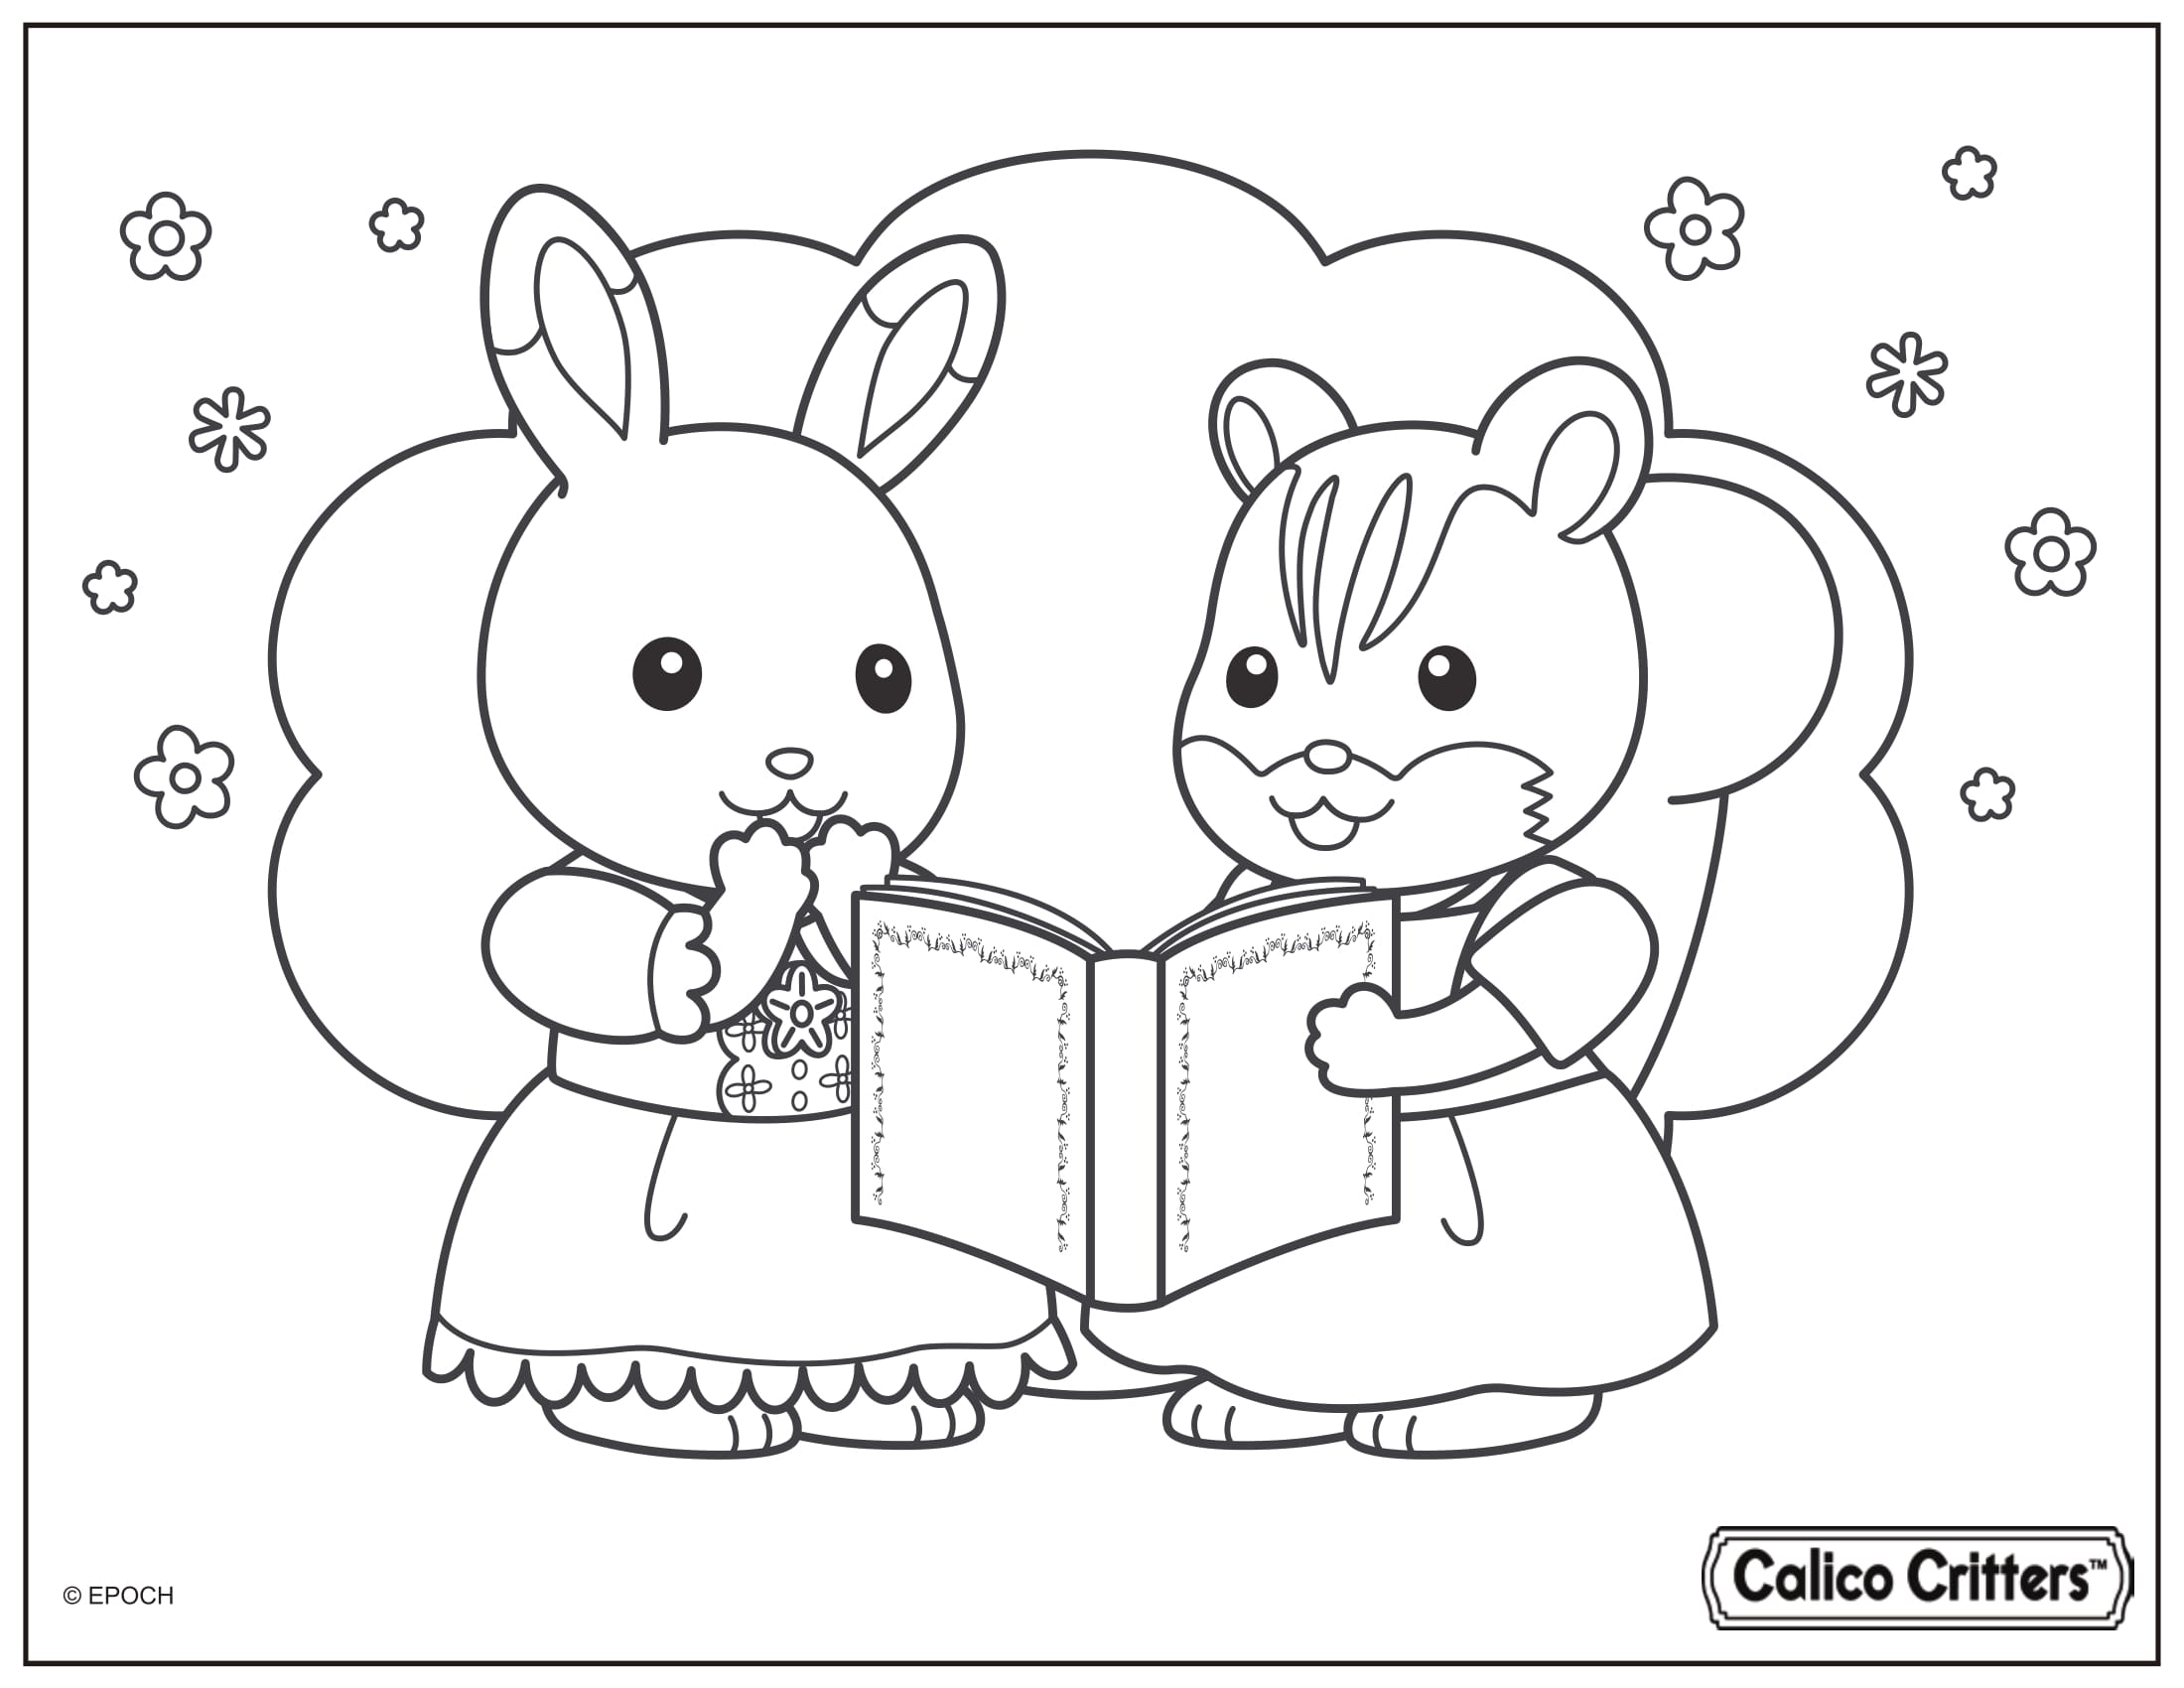 Calico Critters Read Great Story Book